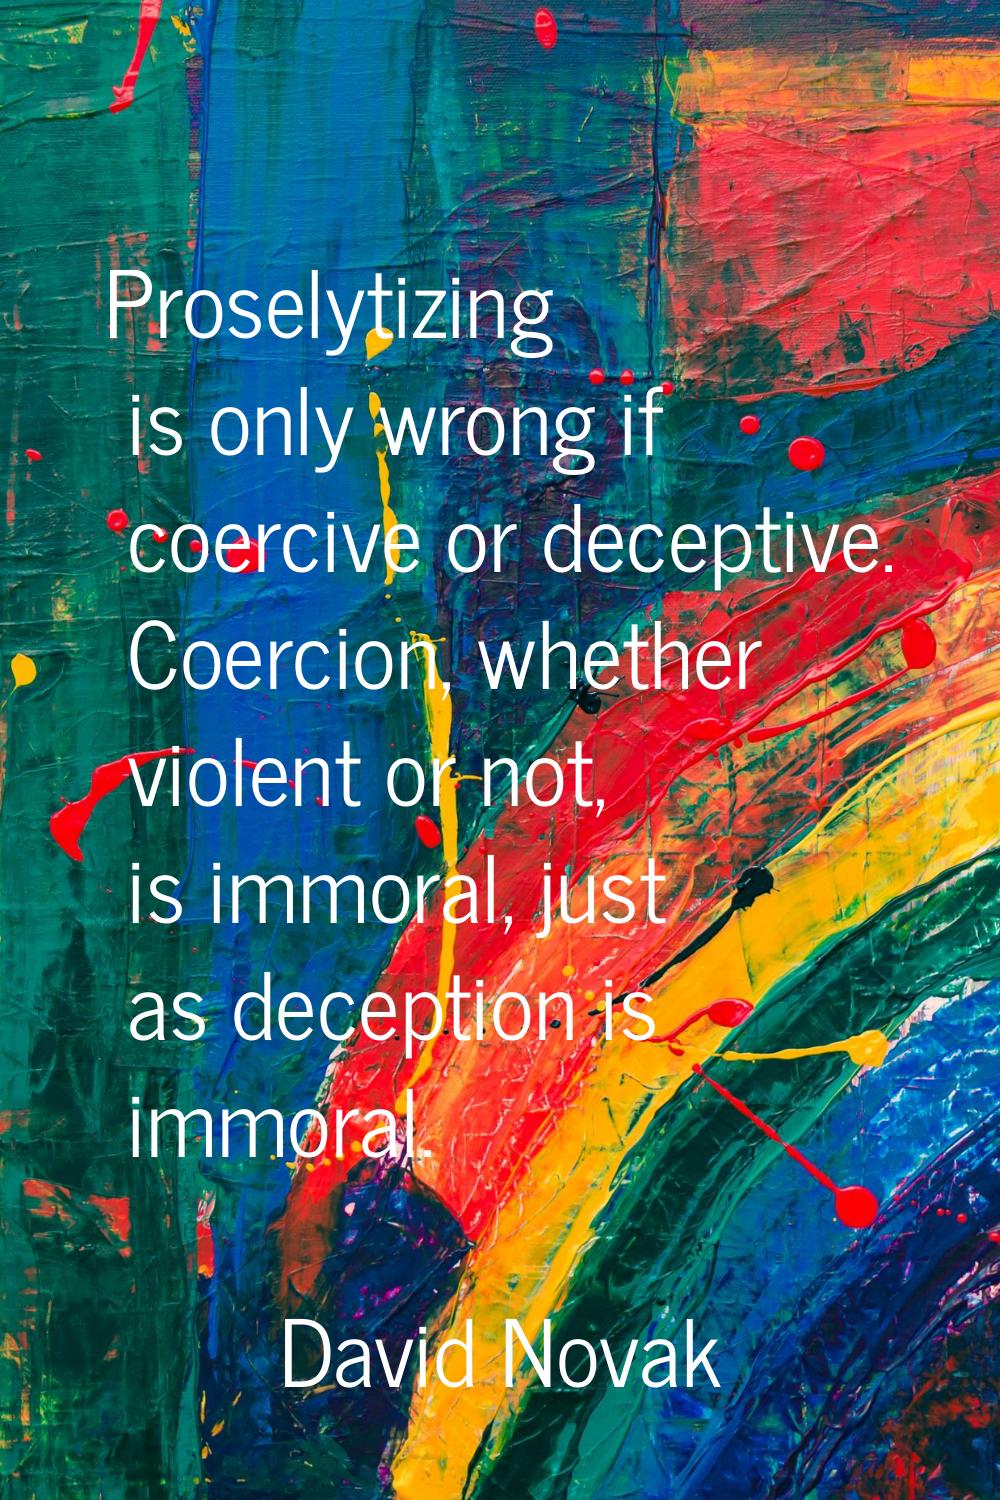 Proselytizing is only wrong if coercive or deceptive. Coercion, whether violent or not, is immoral,